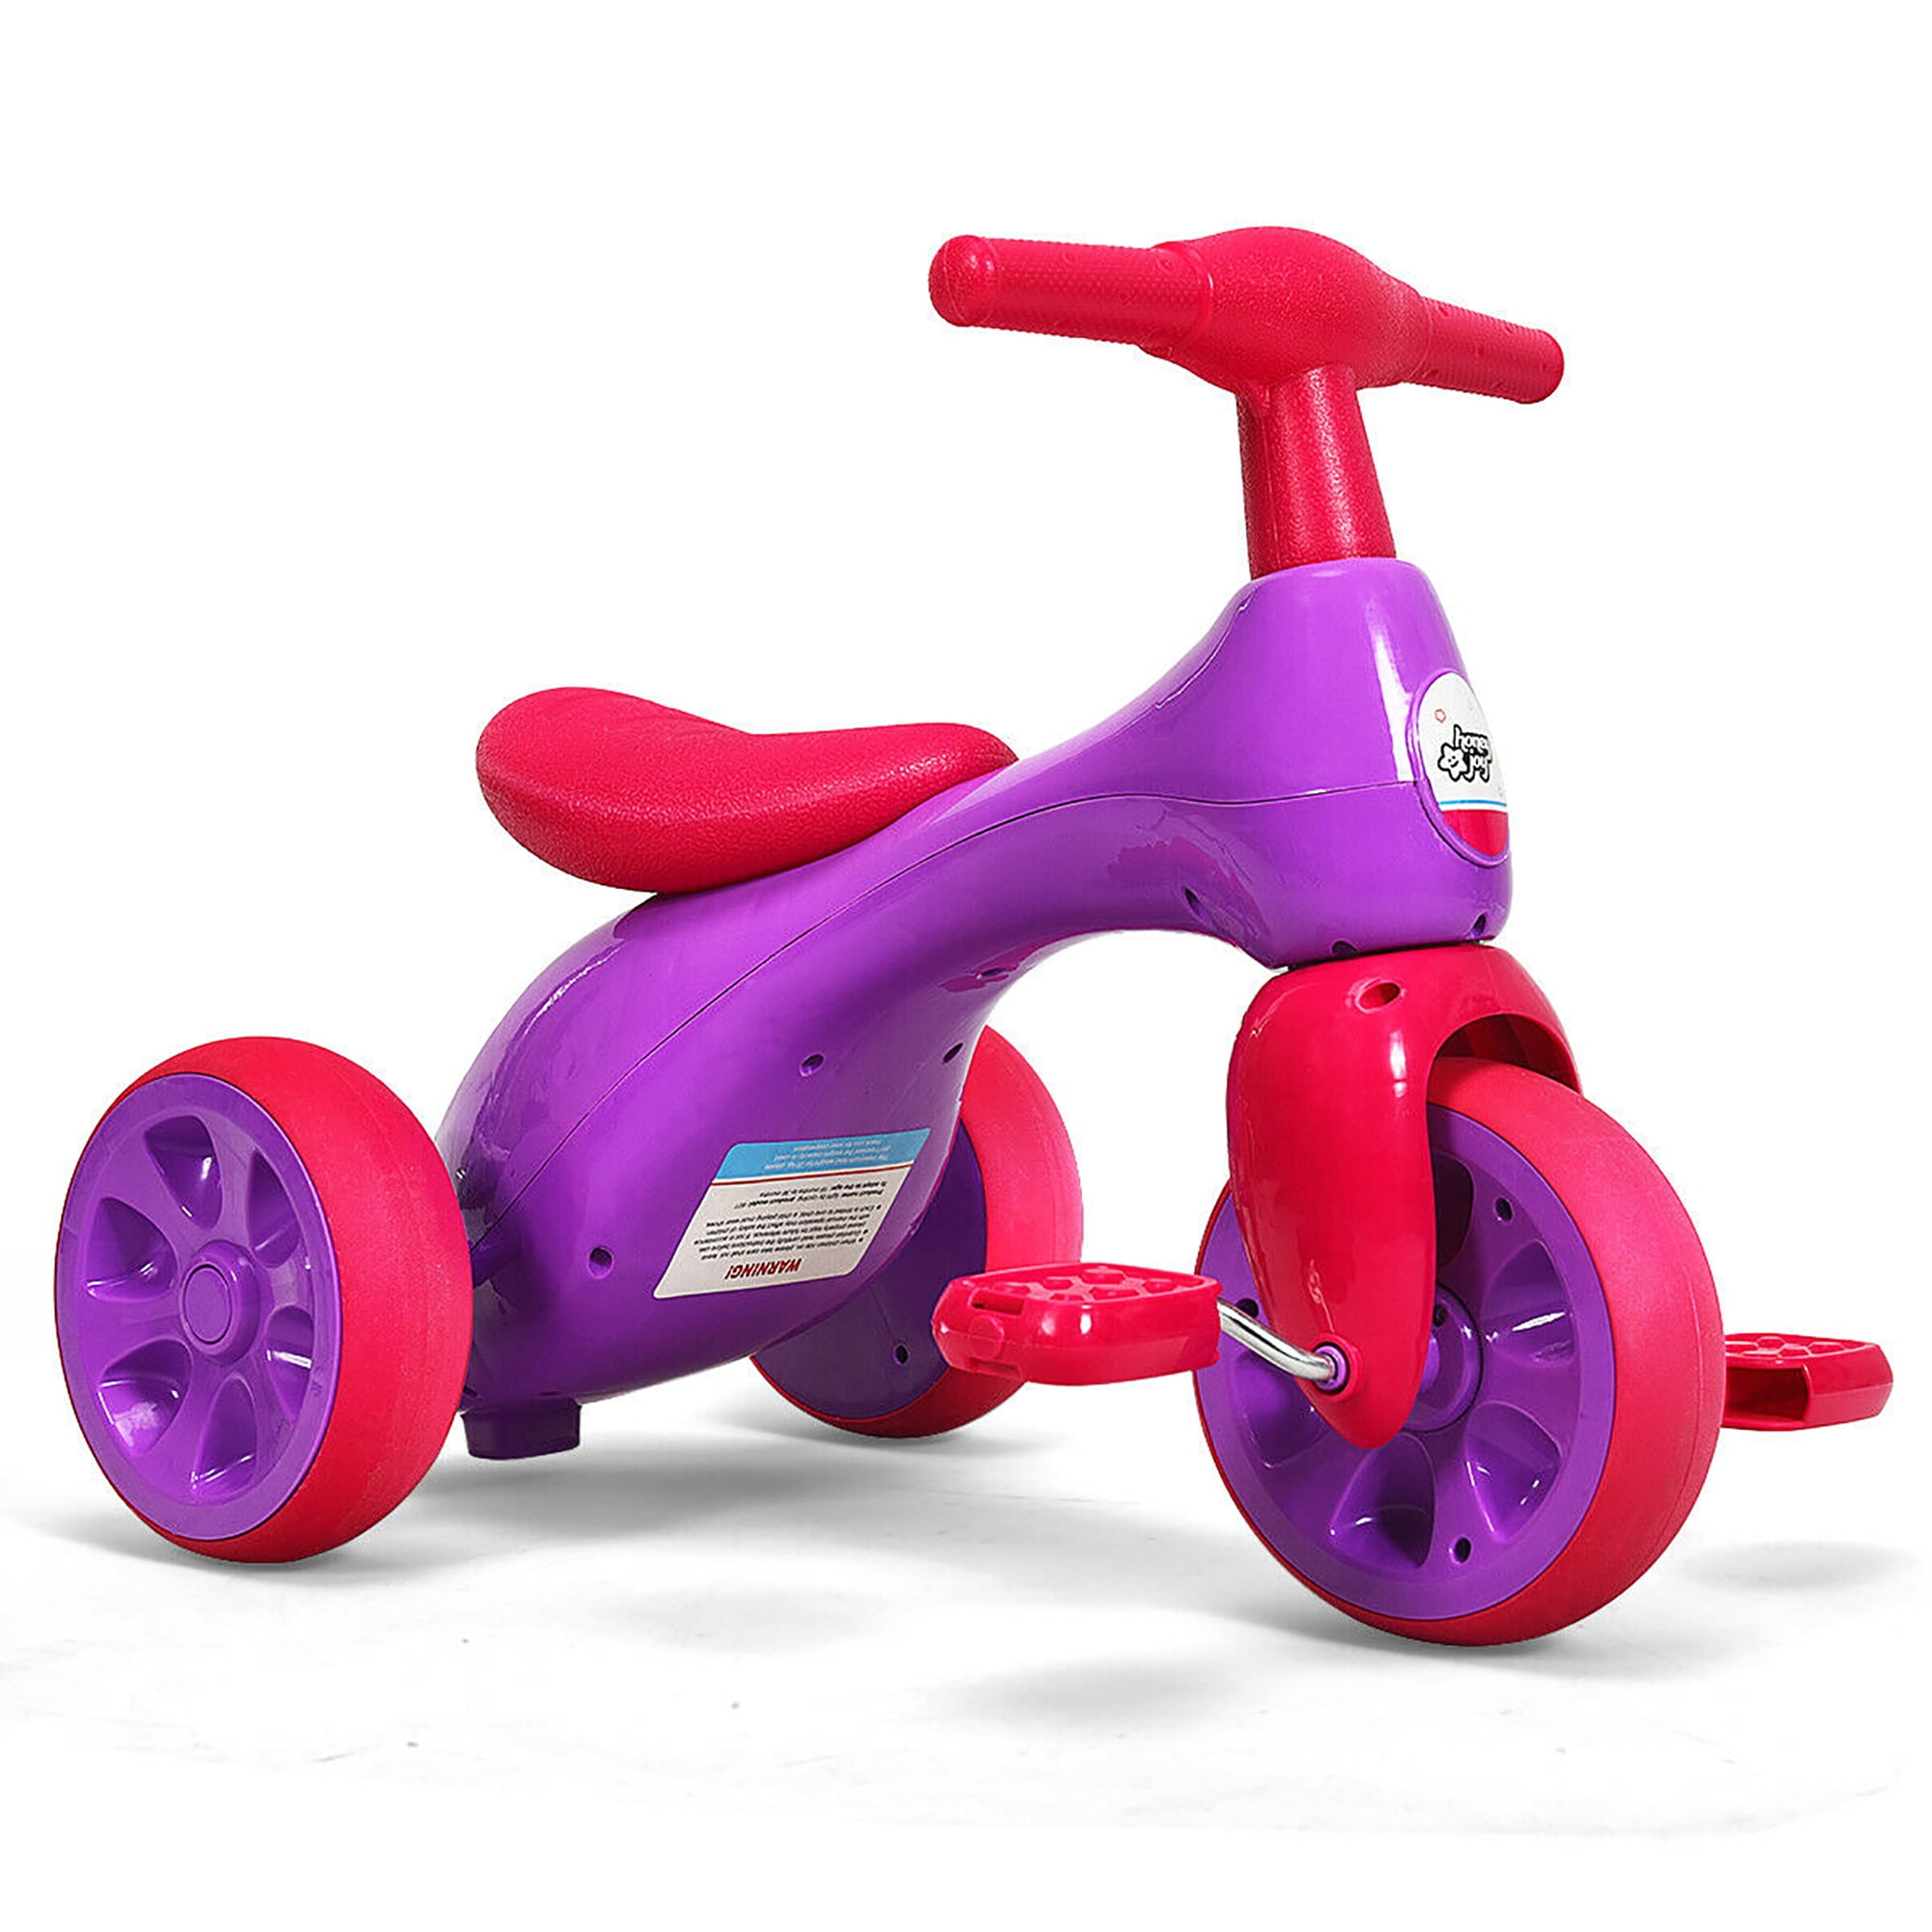 Kids Toddler Tricycle Balance Bike Sturdy Scooter Riding Toys w/ Sound Seat Pink 